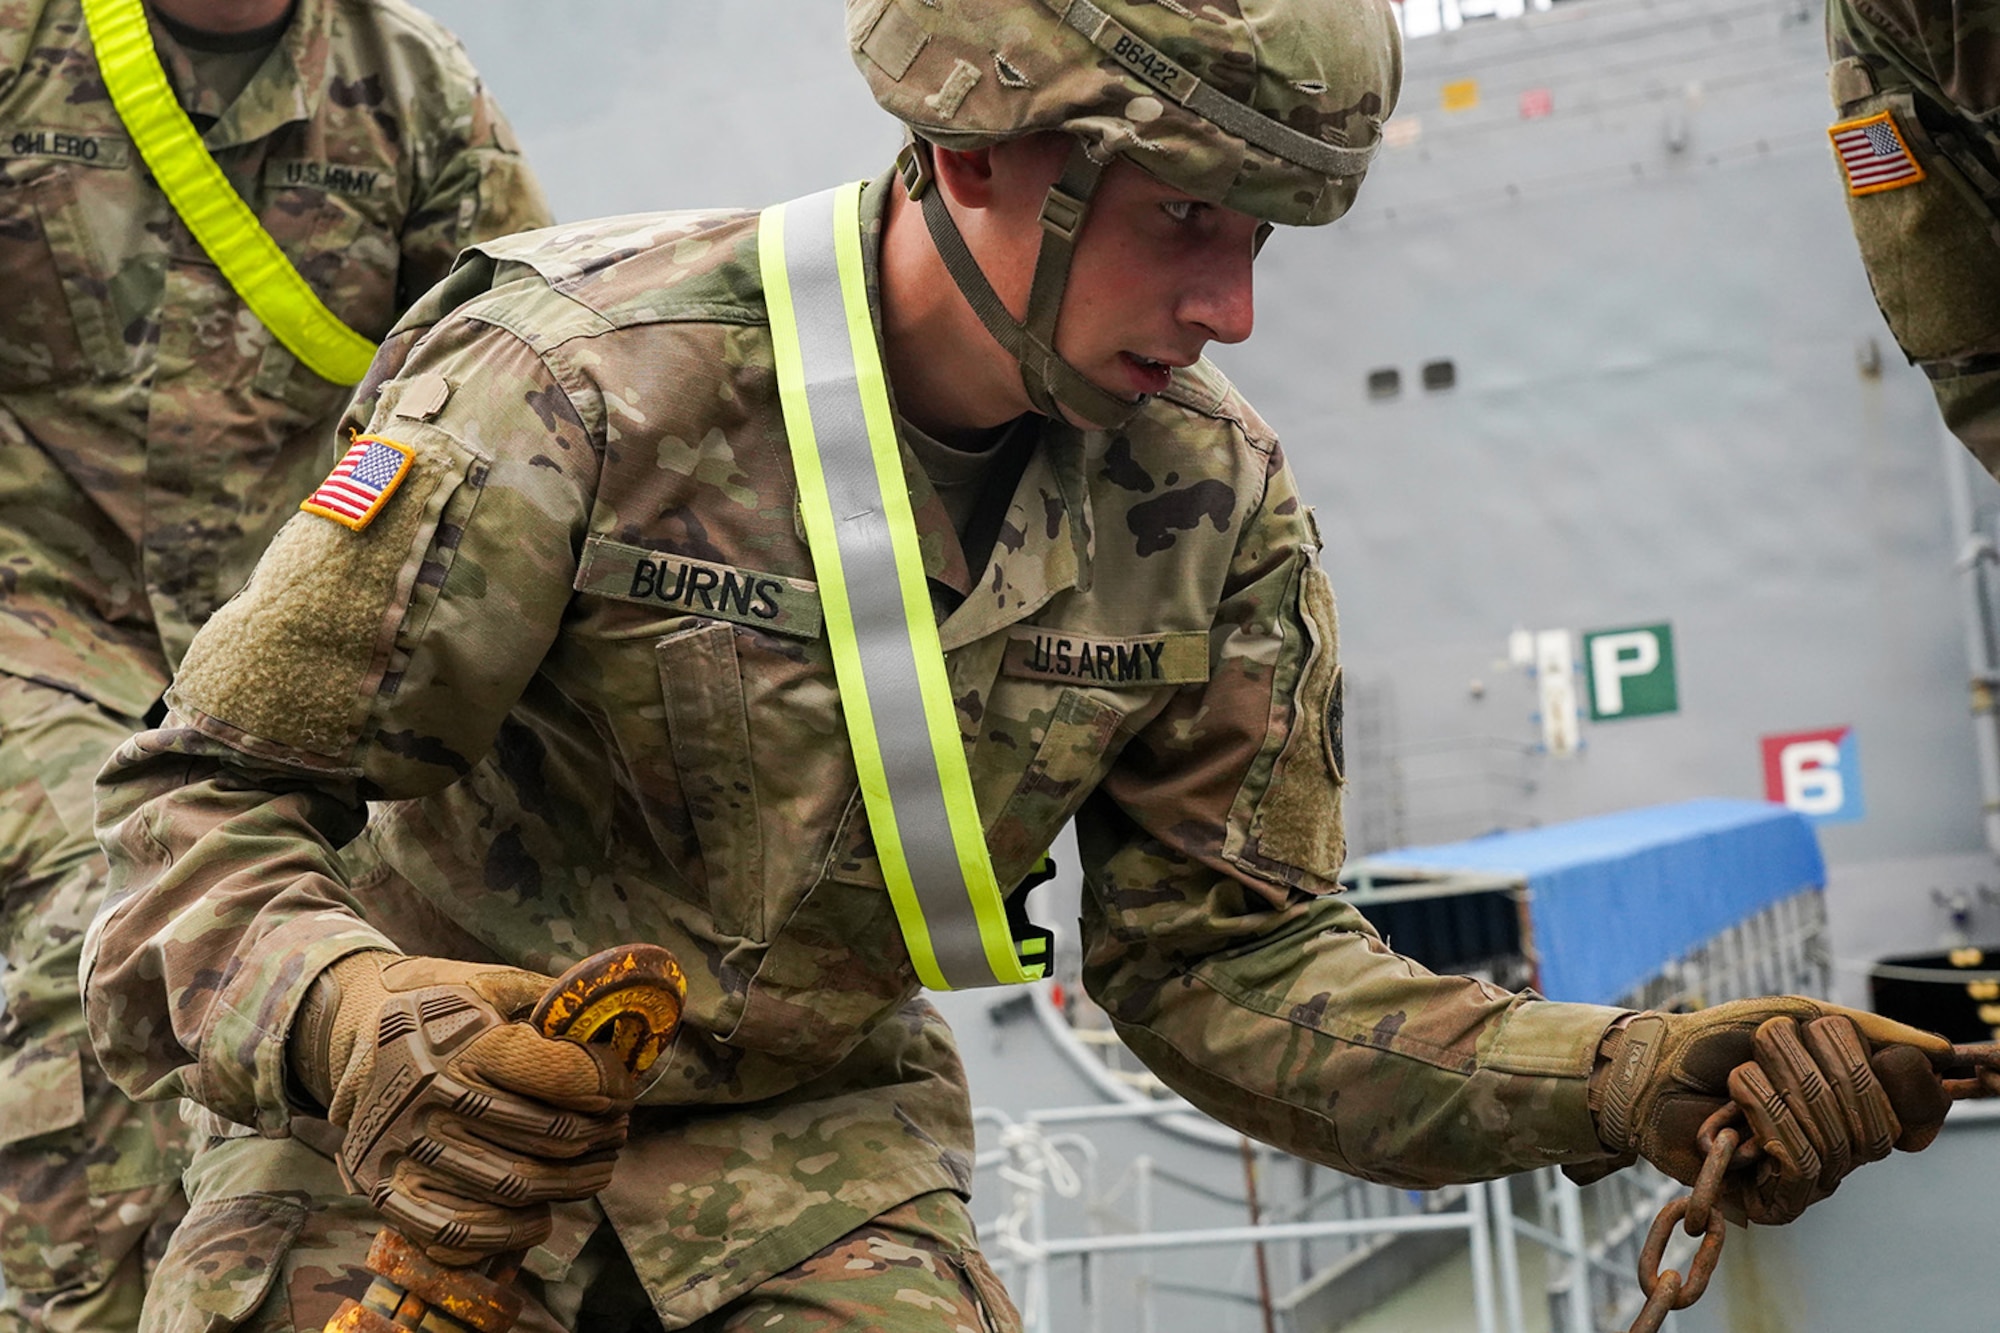 Specialist Timothy Burns, assigned to the 109th Transportation Company, 17th Combat Support Sustainment Battalion, U.S. Army Alaska, secures U.S. Marine Corps bulk fuel supplies and equipment from the U.S.S. Comstock (LSD-45), a Whidbey Island-class dock landing ship, at the port of Seward, Alaska, Sept. 19, 2019, for transport to Joint Base Elmendorf-Richardson, Alaska. The U.S. Navy is conducting an Arctic Expeditionary Capabilities Exercise to test its logistical effectiveness and joint-service interoperability while responding to conflict or disaster in an austere environment with no organic assets.